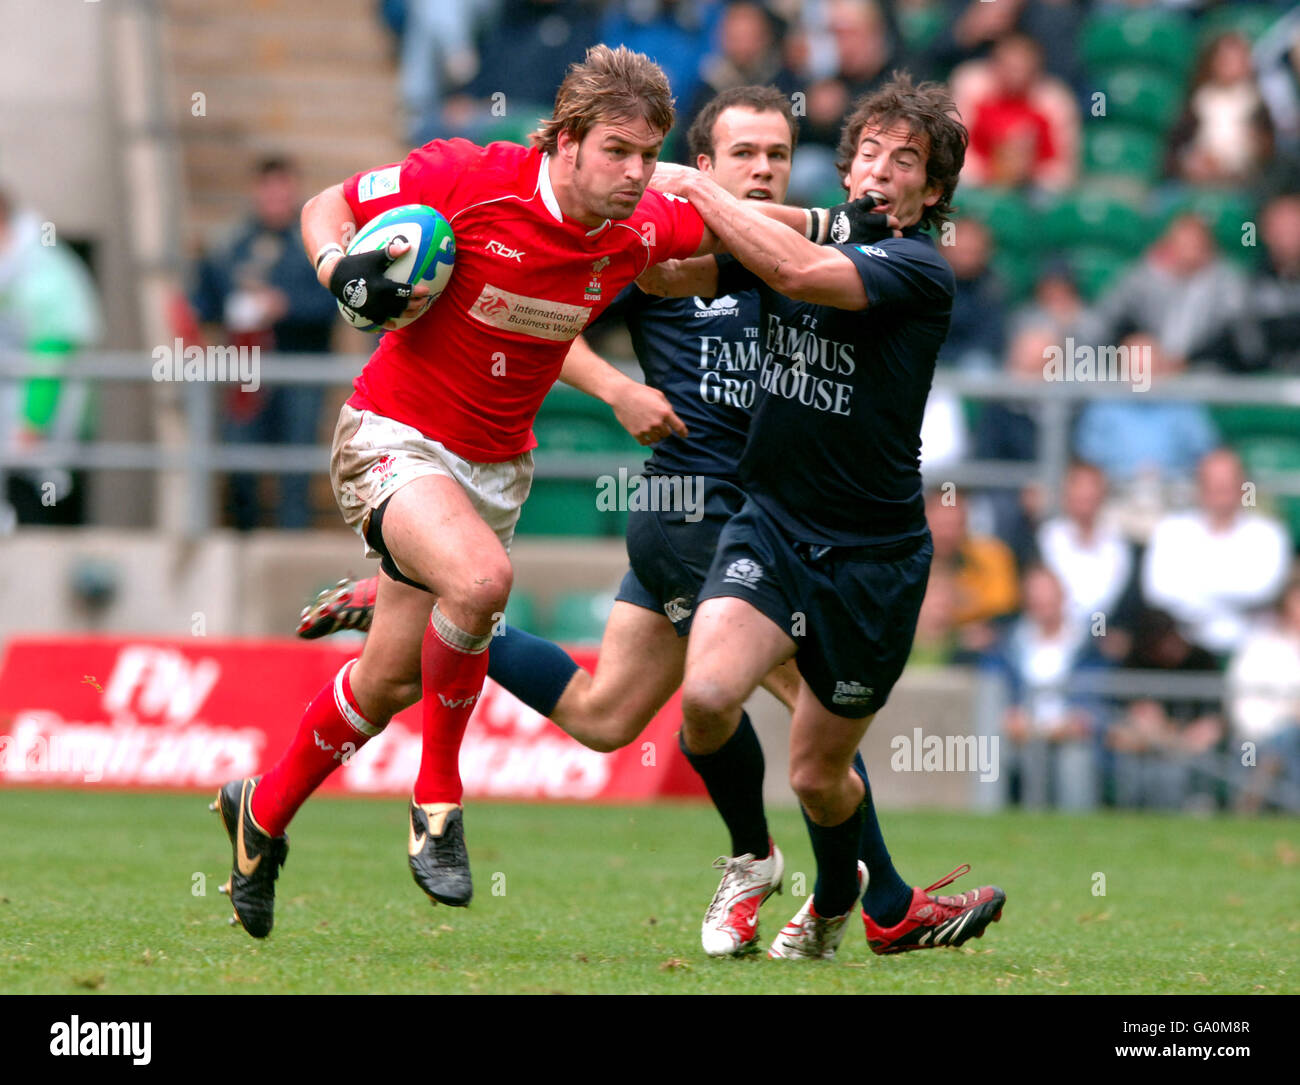 Rugby Union - Emirates Airline London Sevens - Wales v Scotland - Twickenham. Wales' Tal Selley (l) hands off the tackle of Scotland's Colin Gregor (r) Stock Photo